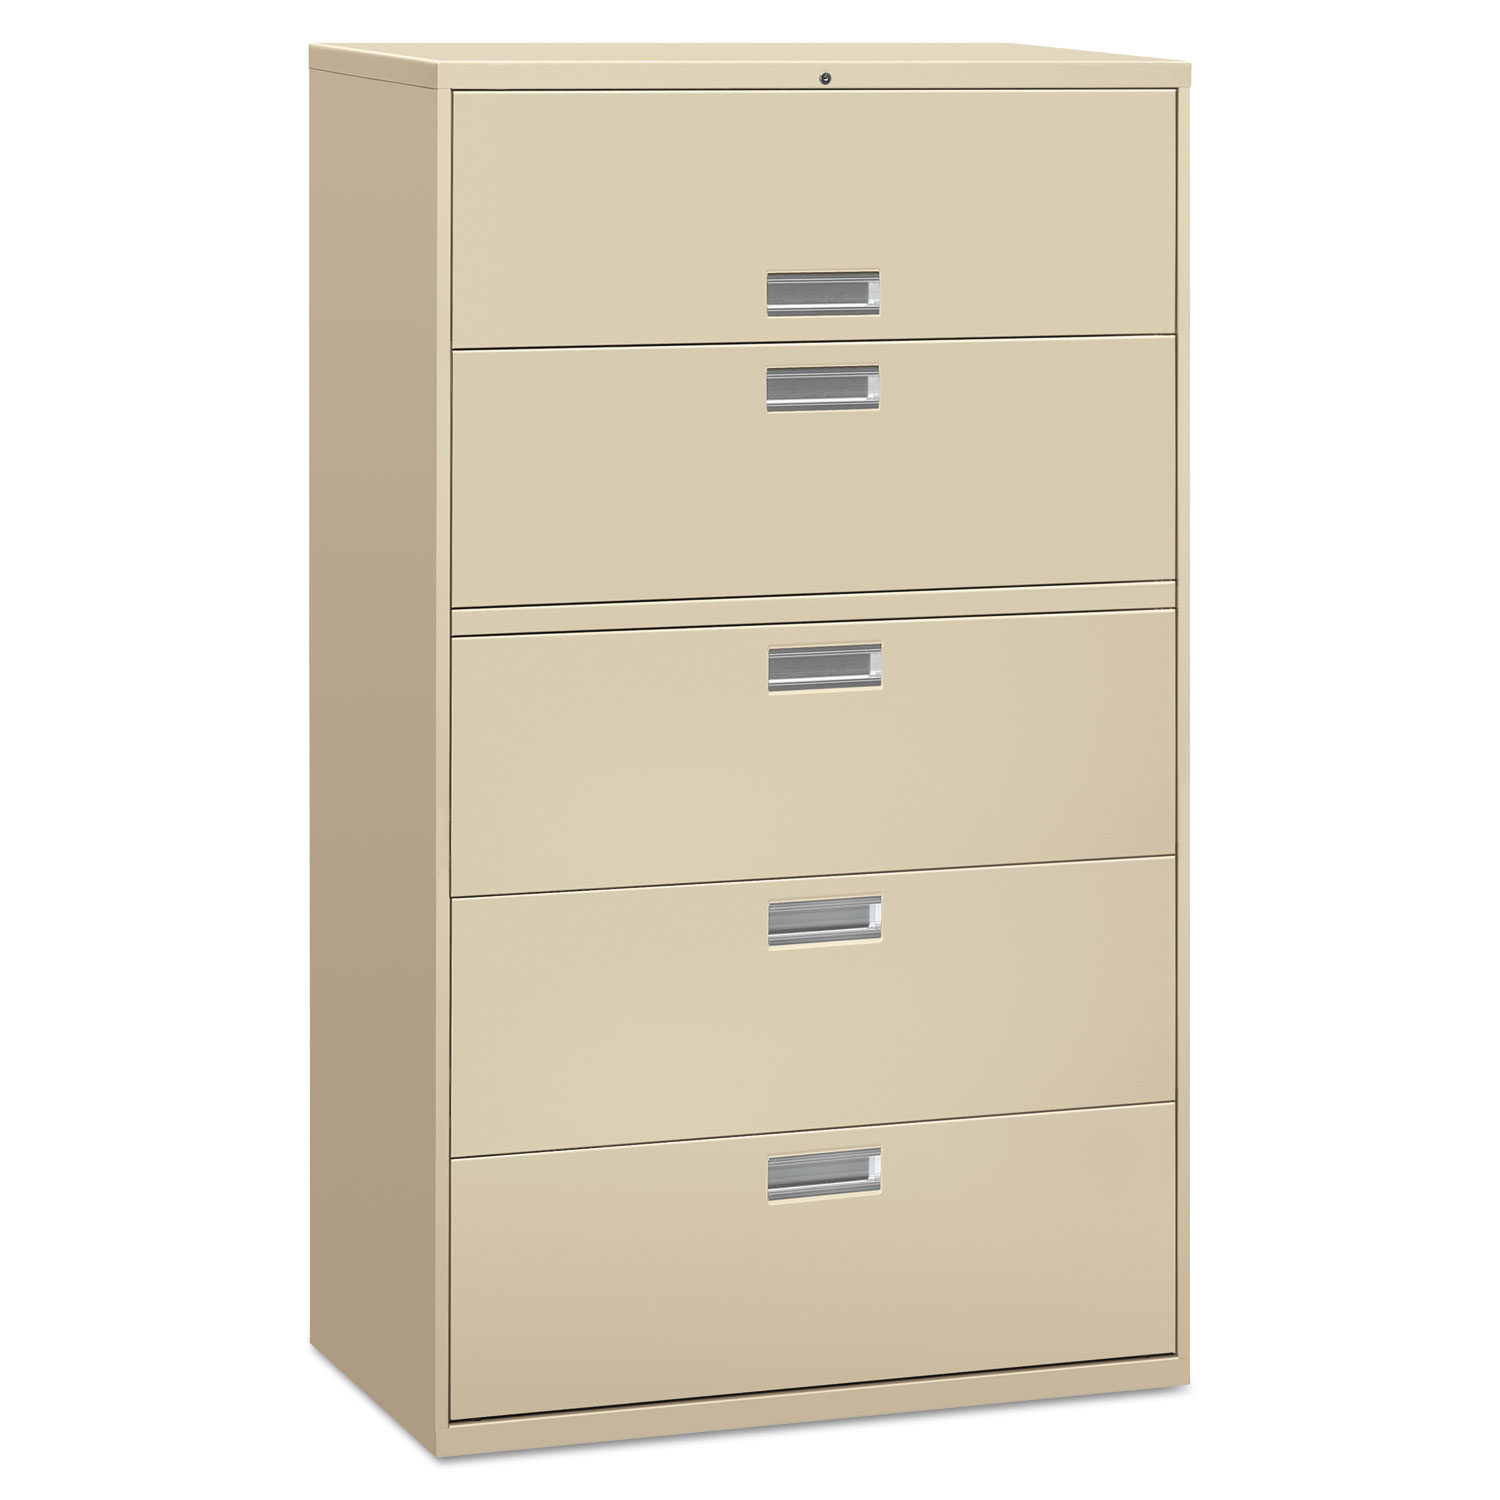 Alera Two-Drawer Lateral File Cabinet, 36 w x 18 d x 28 h, Charcoal - image 2 of 2